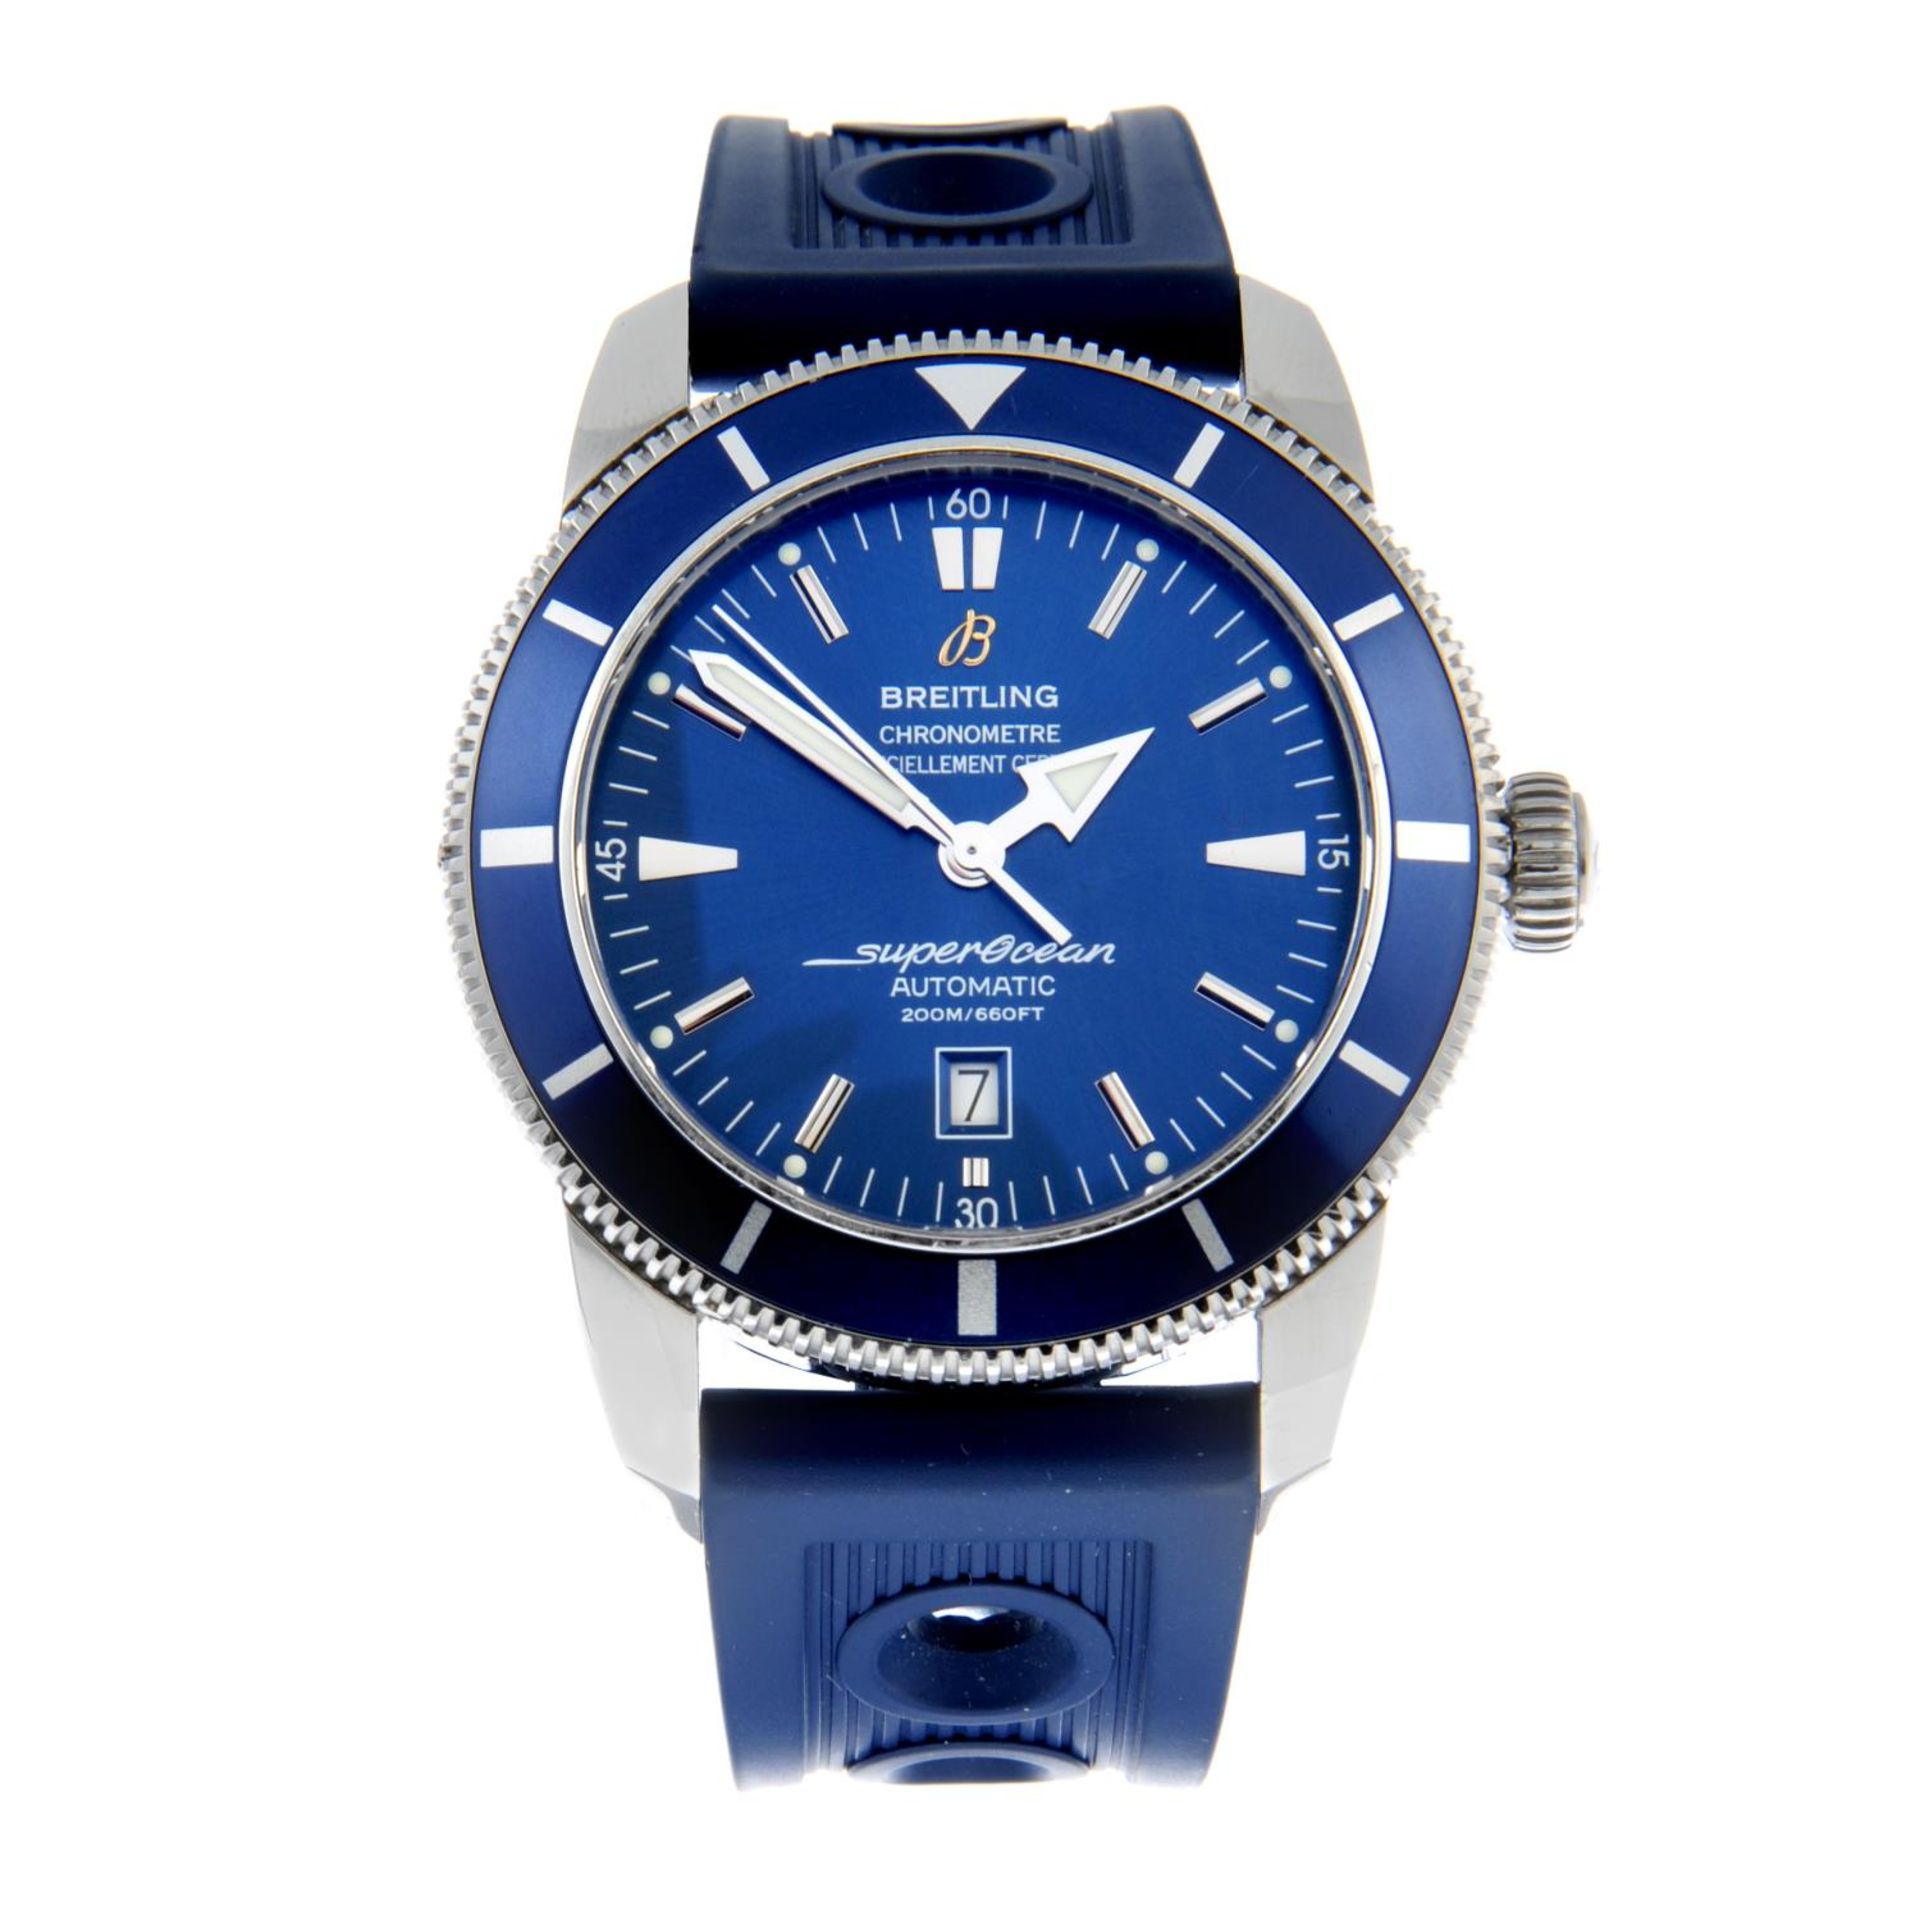 BREITLING - a SuperOceanHeritage 46 wrist watch.Stainless steel case withcalibrated bezel.